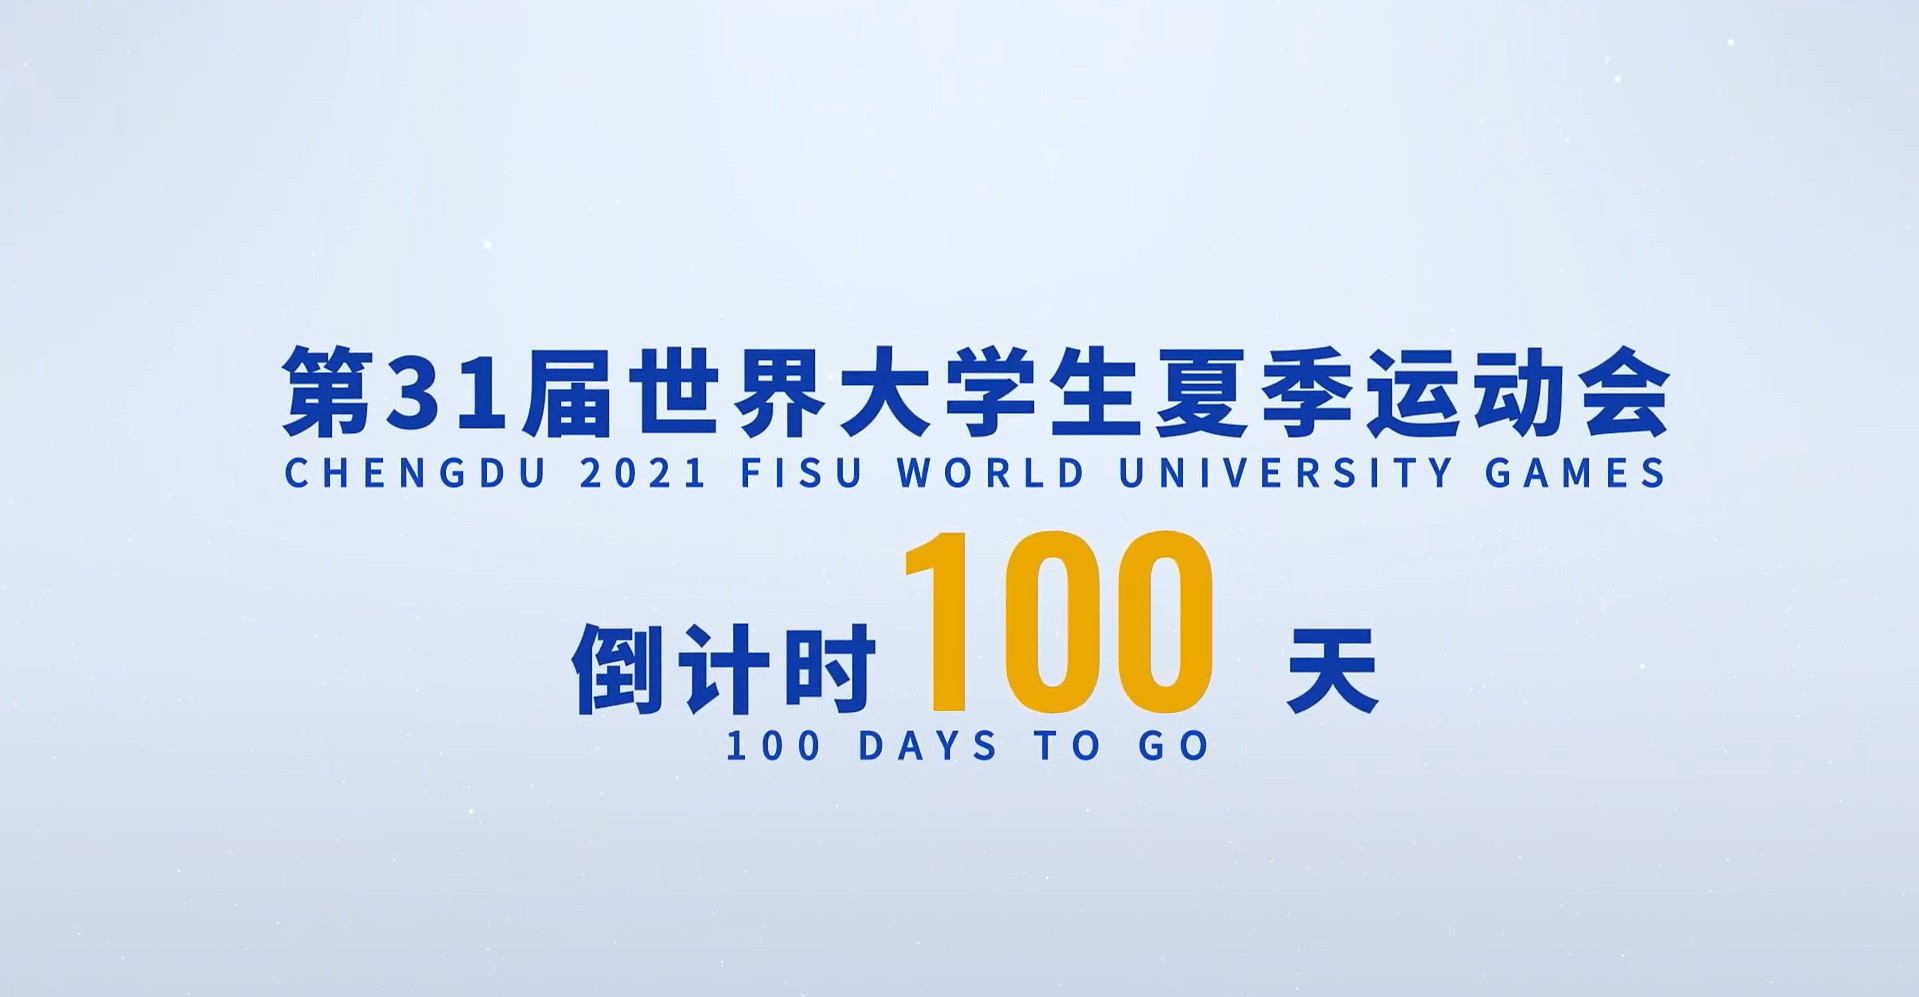 The Chengdu 2021 FISU World University Games recently passed the 100 days to go mark, with preparations said to be going well  ©YouTube